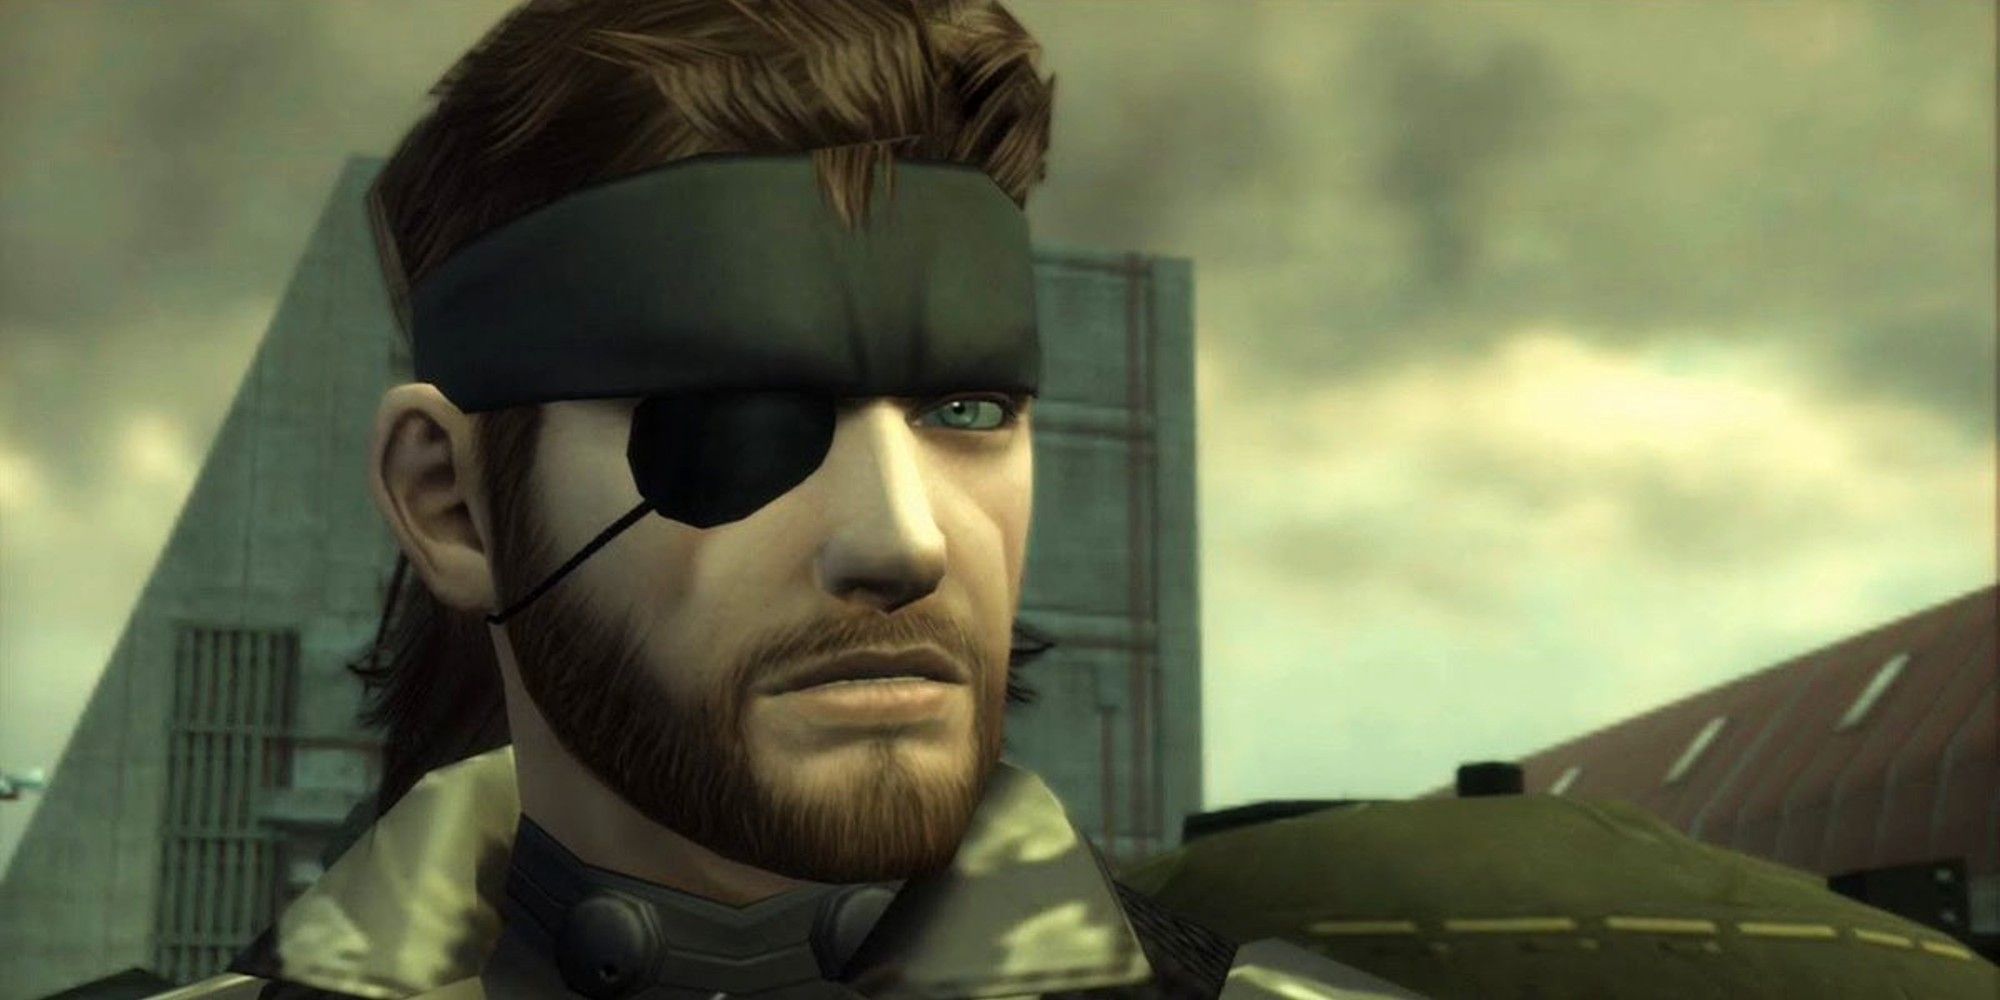 Big Boss looking at a grim situation